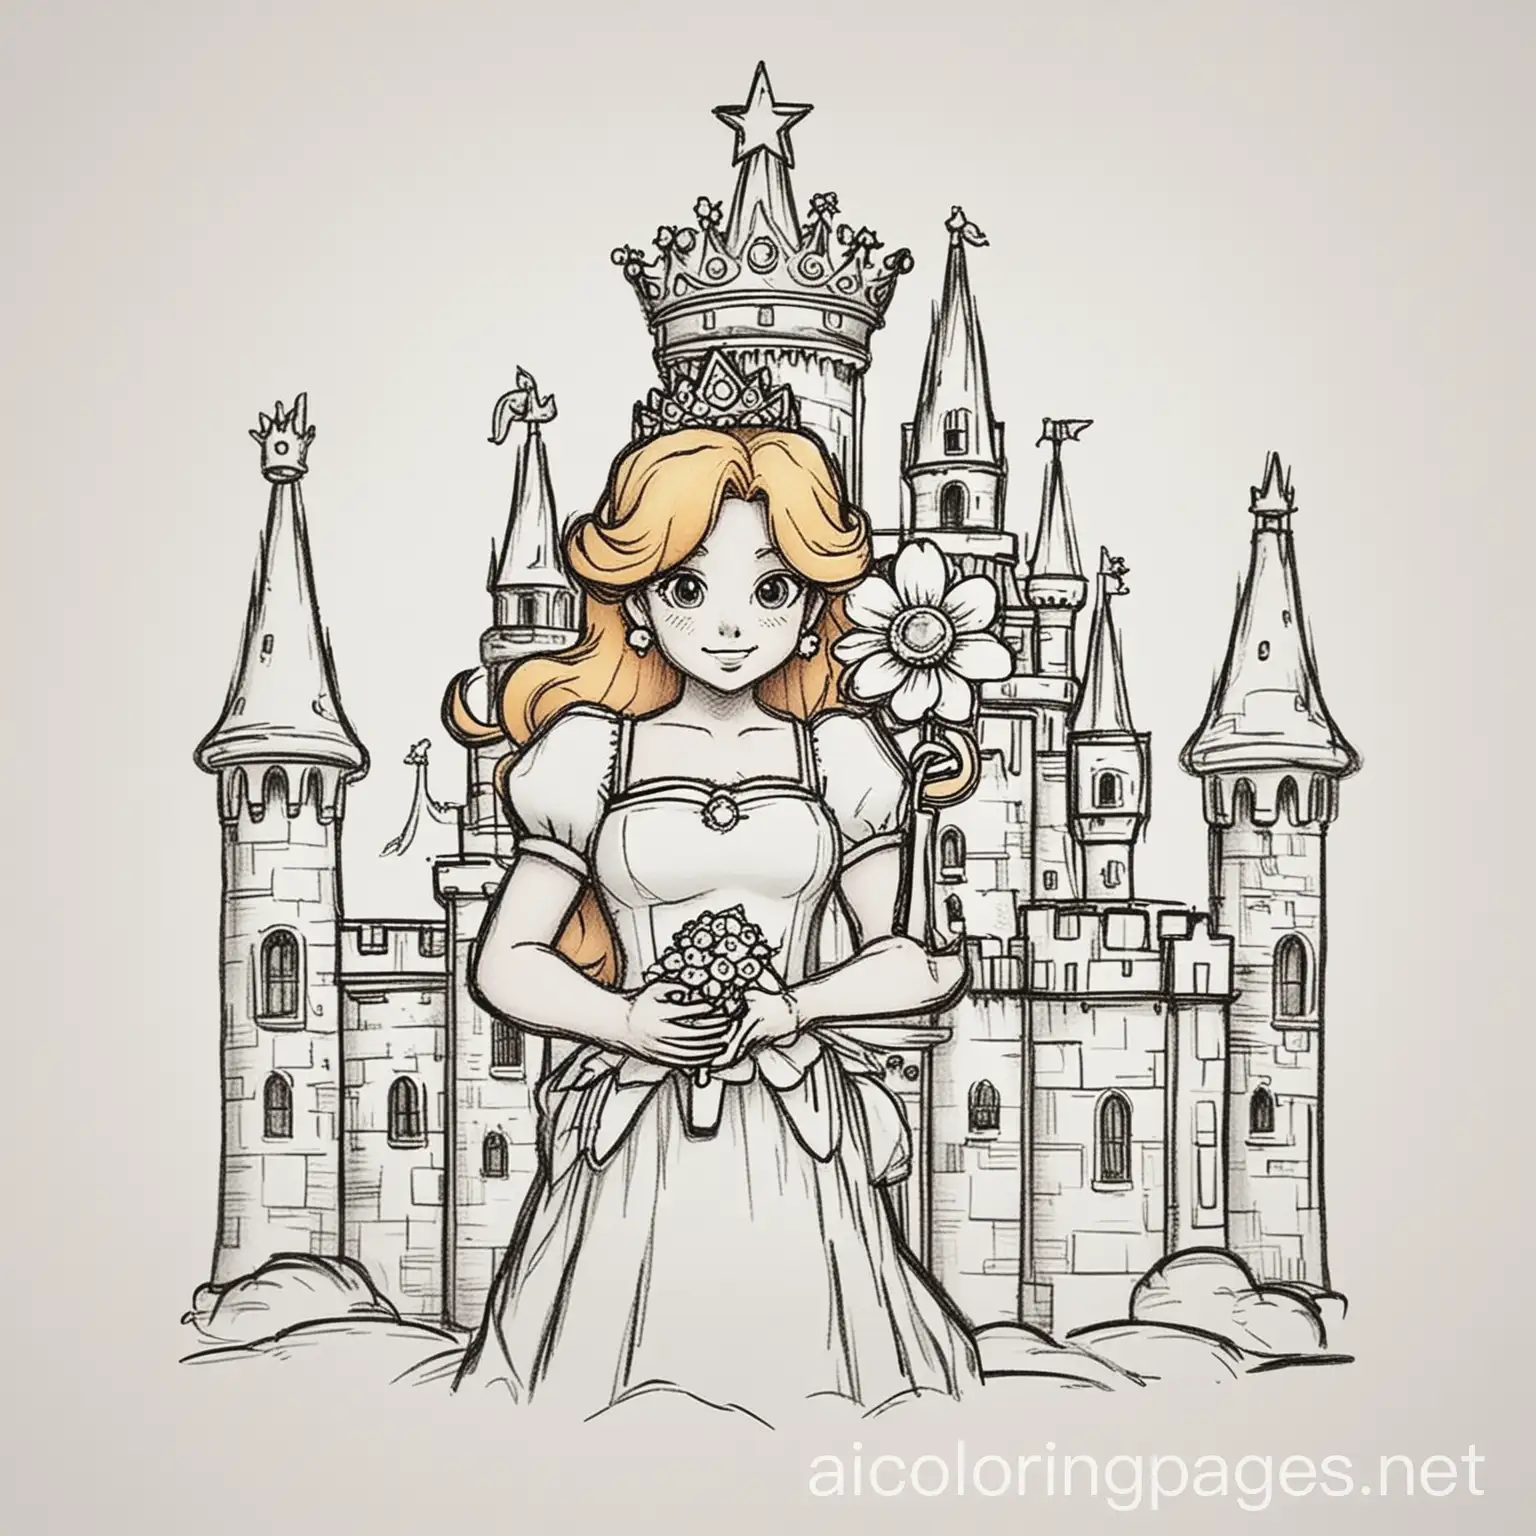 Princess peach’s castle with princess peach, Daisy, and Rosalina. Peach holding a crown, Rosalina holding her magic star, and Daisy holding a daisy flower, Coloring Page, black and white, line art, white background, Simplicity, Ample White Space. The background of the coloring page is plain white to make it easy for young children to color within the lines. The outlines of all the subjects are easy to distinguish, making it simple for kids to color without too much difficulty